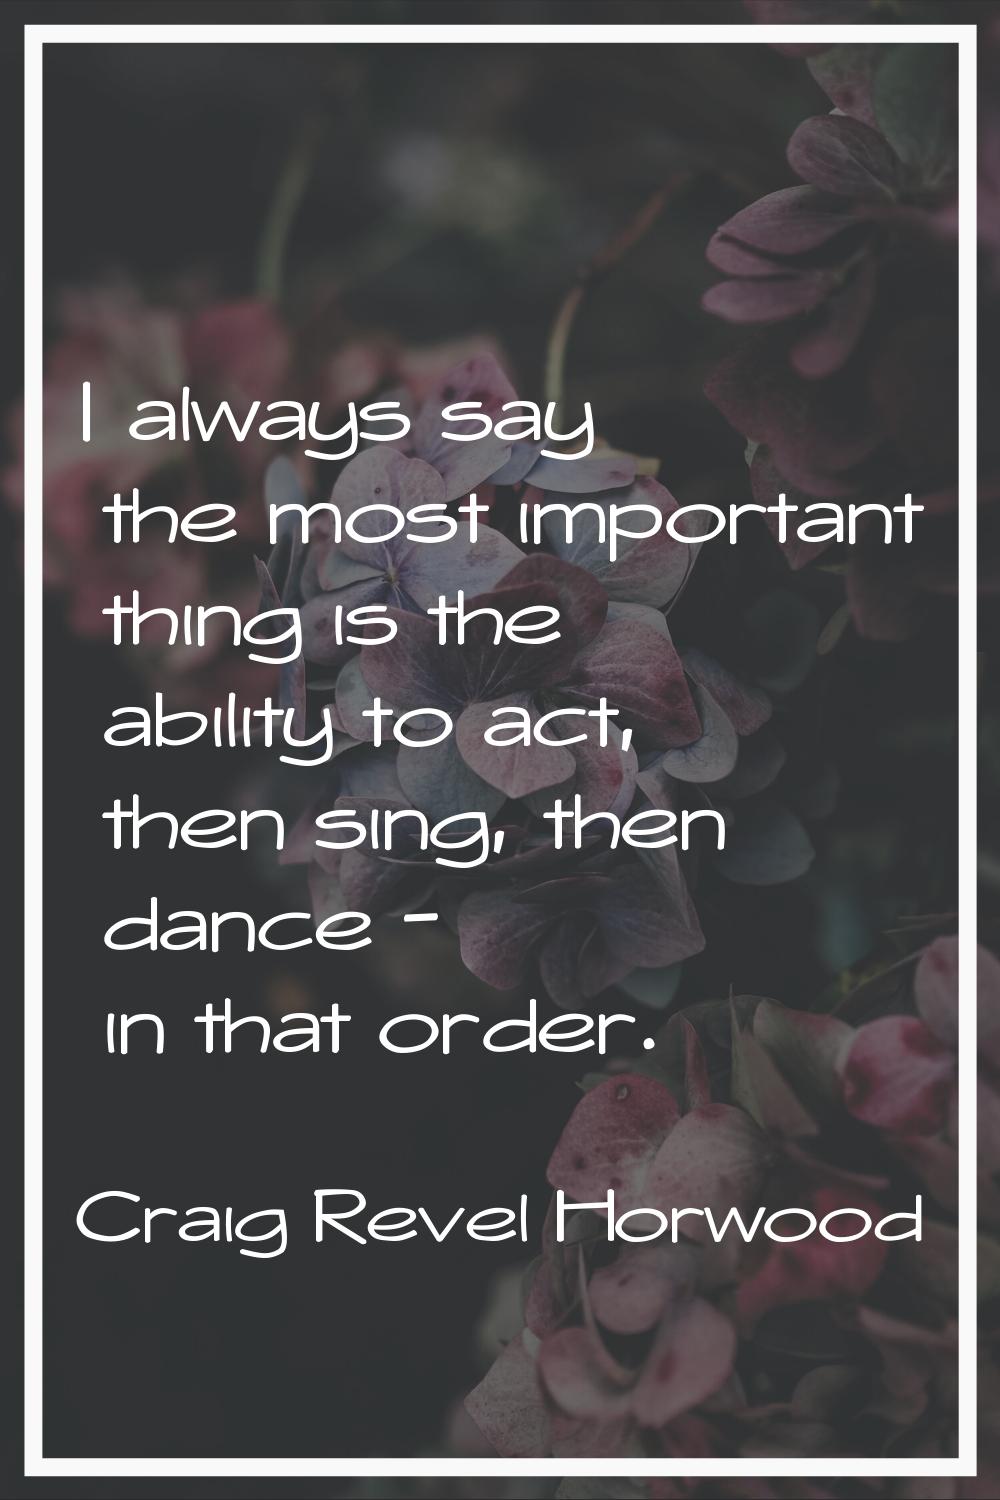 I always say the most important thing is the ability to act, then sing, then dance - in that order.